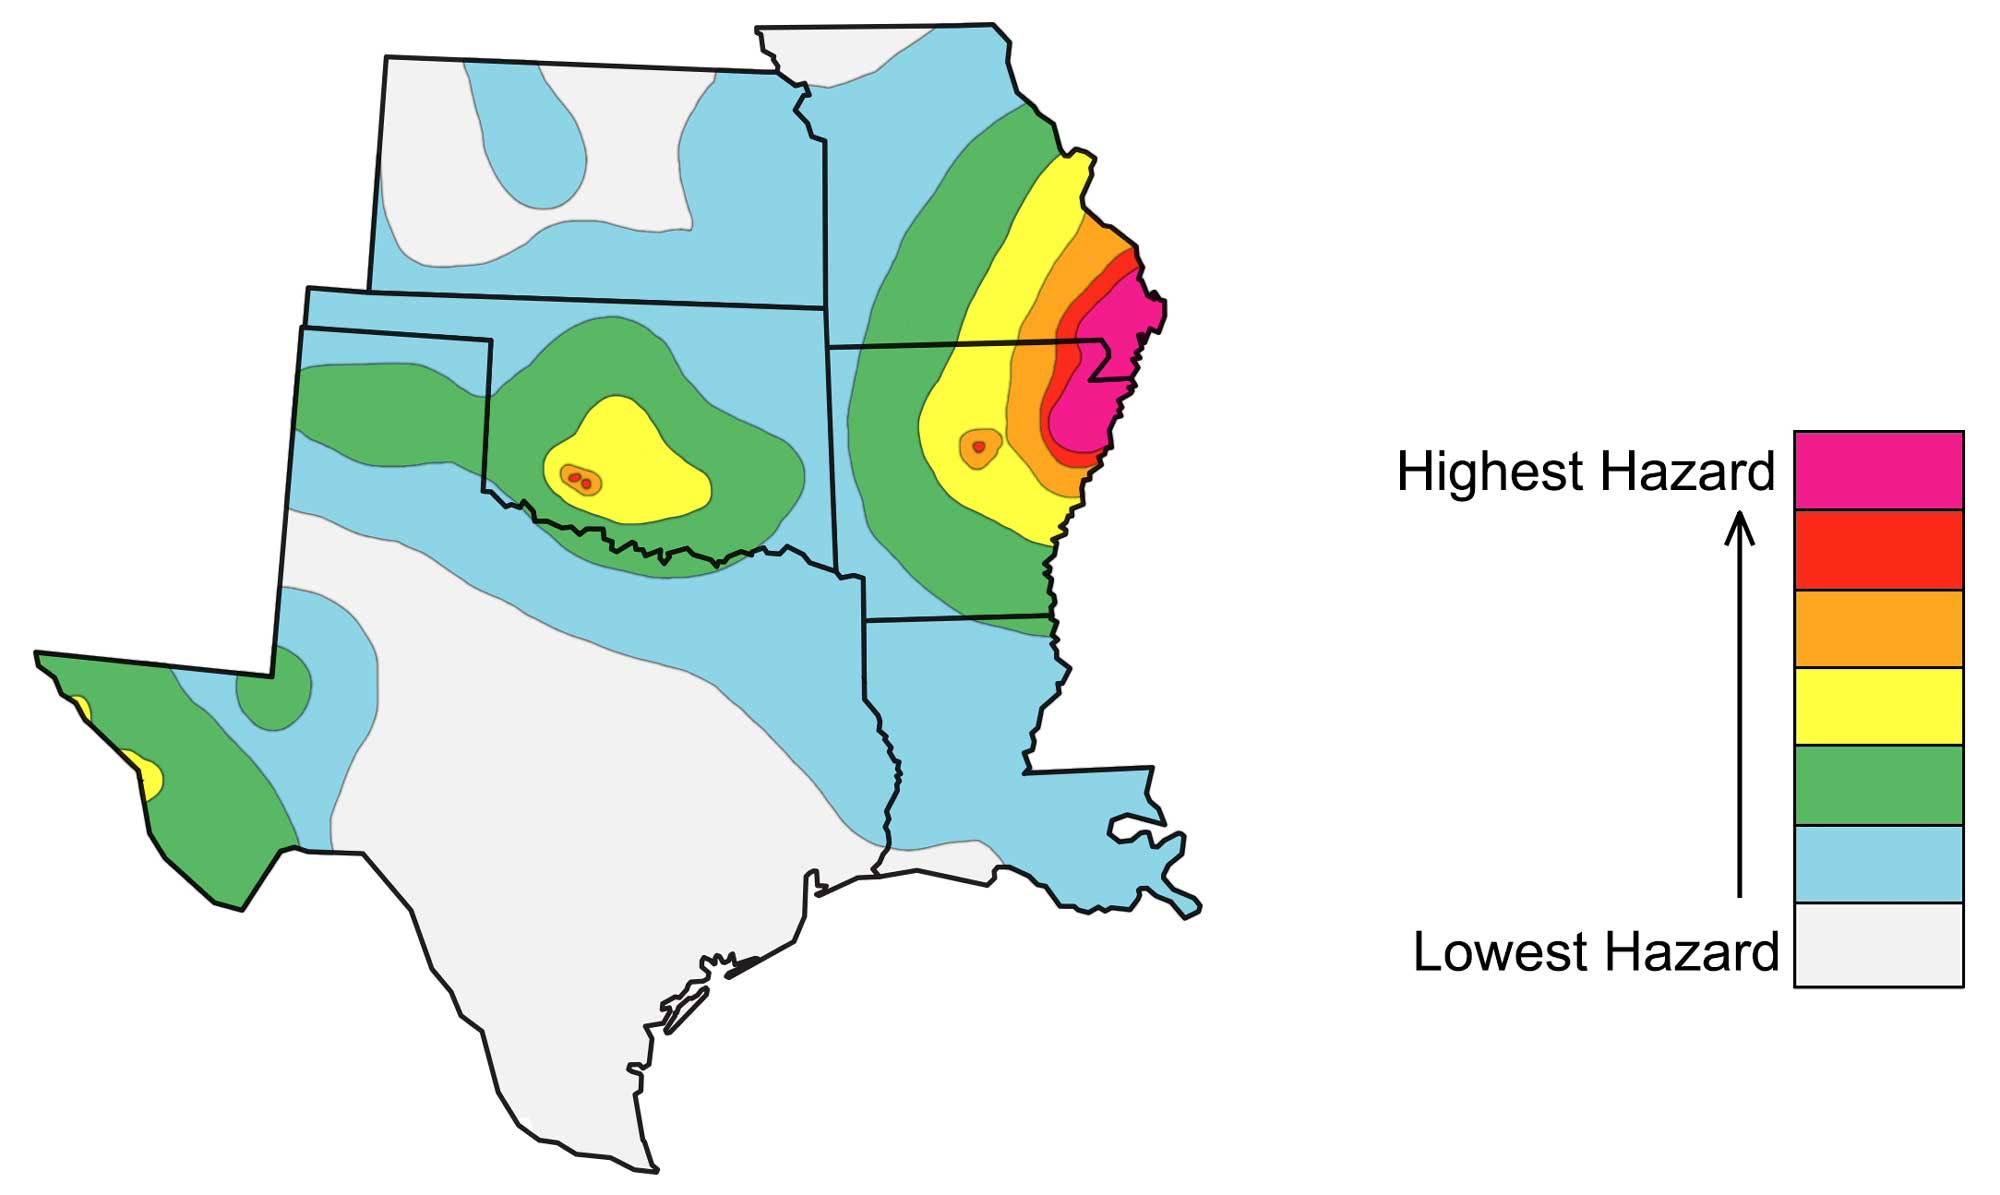 Map of the South Central United States showing regions of highest and lowest hazard. The region around New Madrid, Missouri has the highest hazard level.